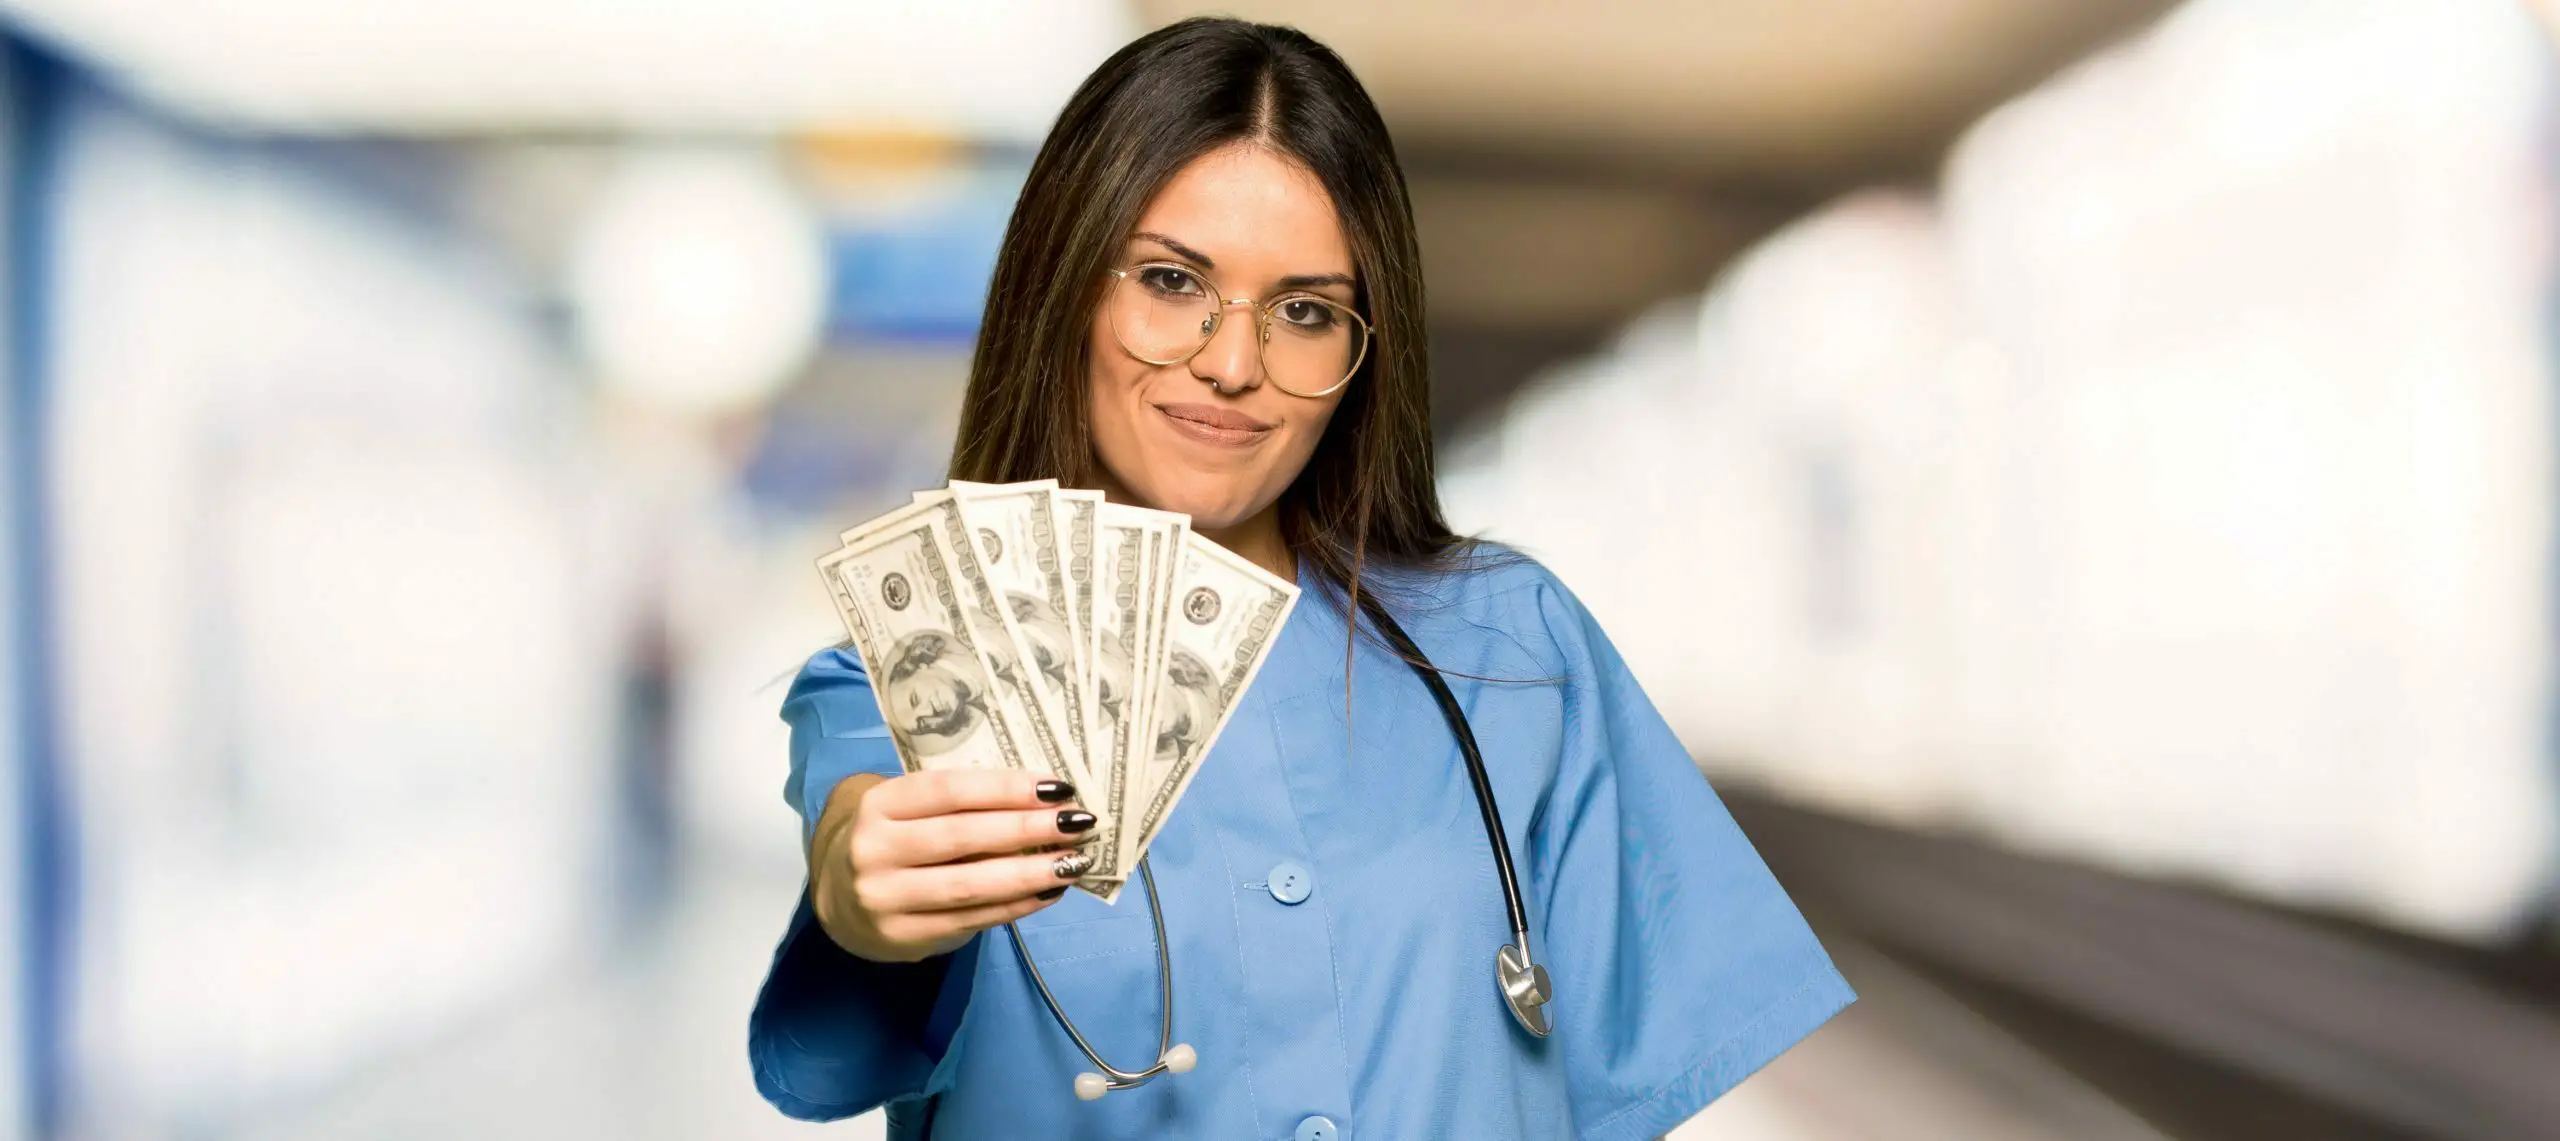 How Much Do Nurses Make? An Overview of Salaries by Role and State